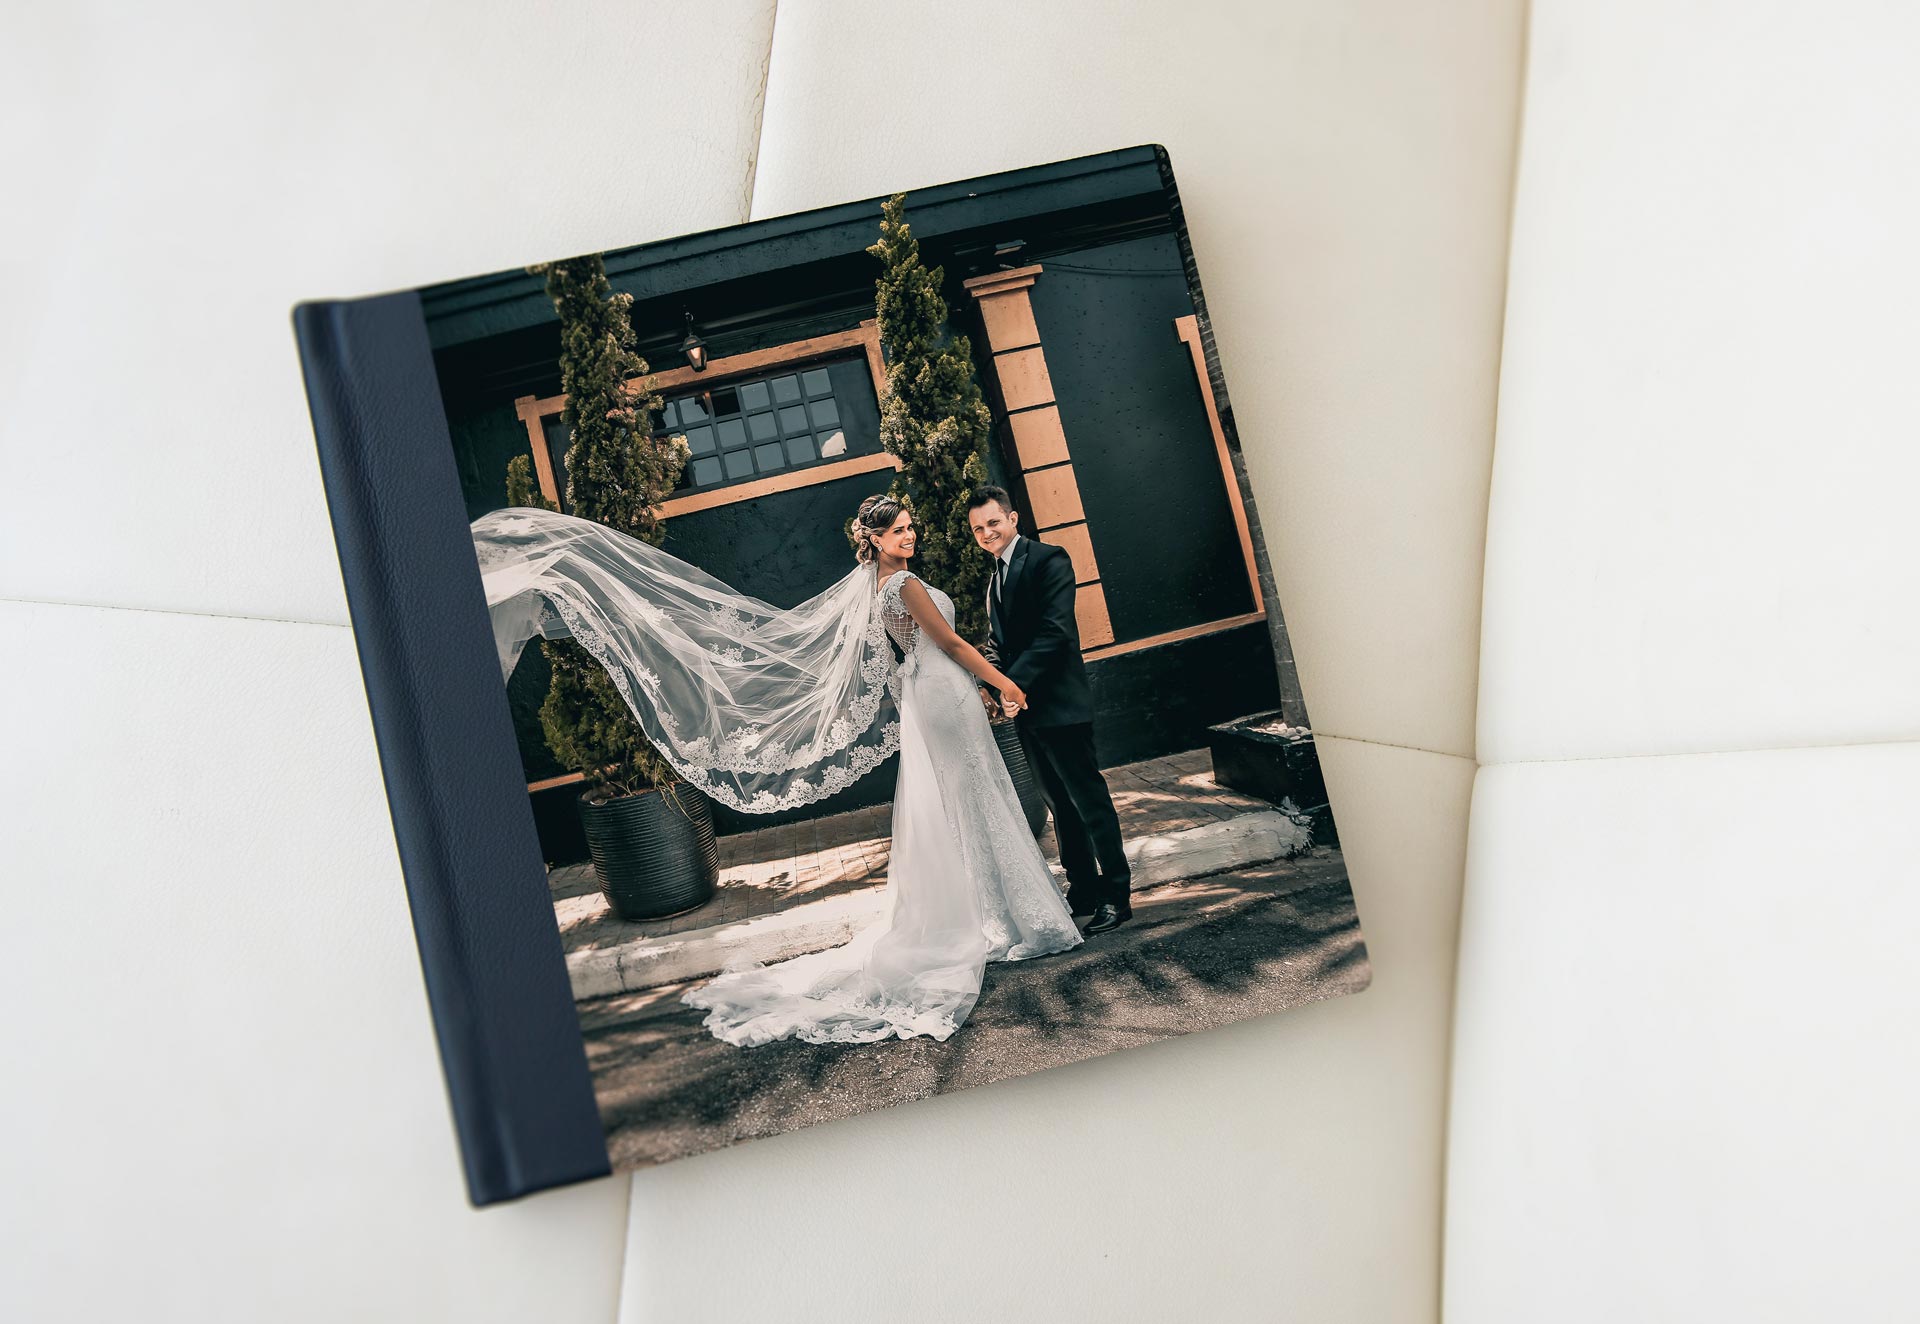 How to talk about Professional Wedding Albums, How to Talk About Professional Wedding Albums